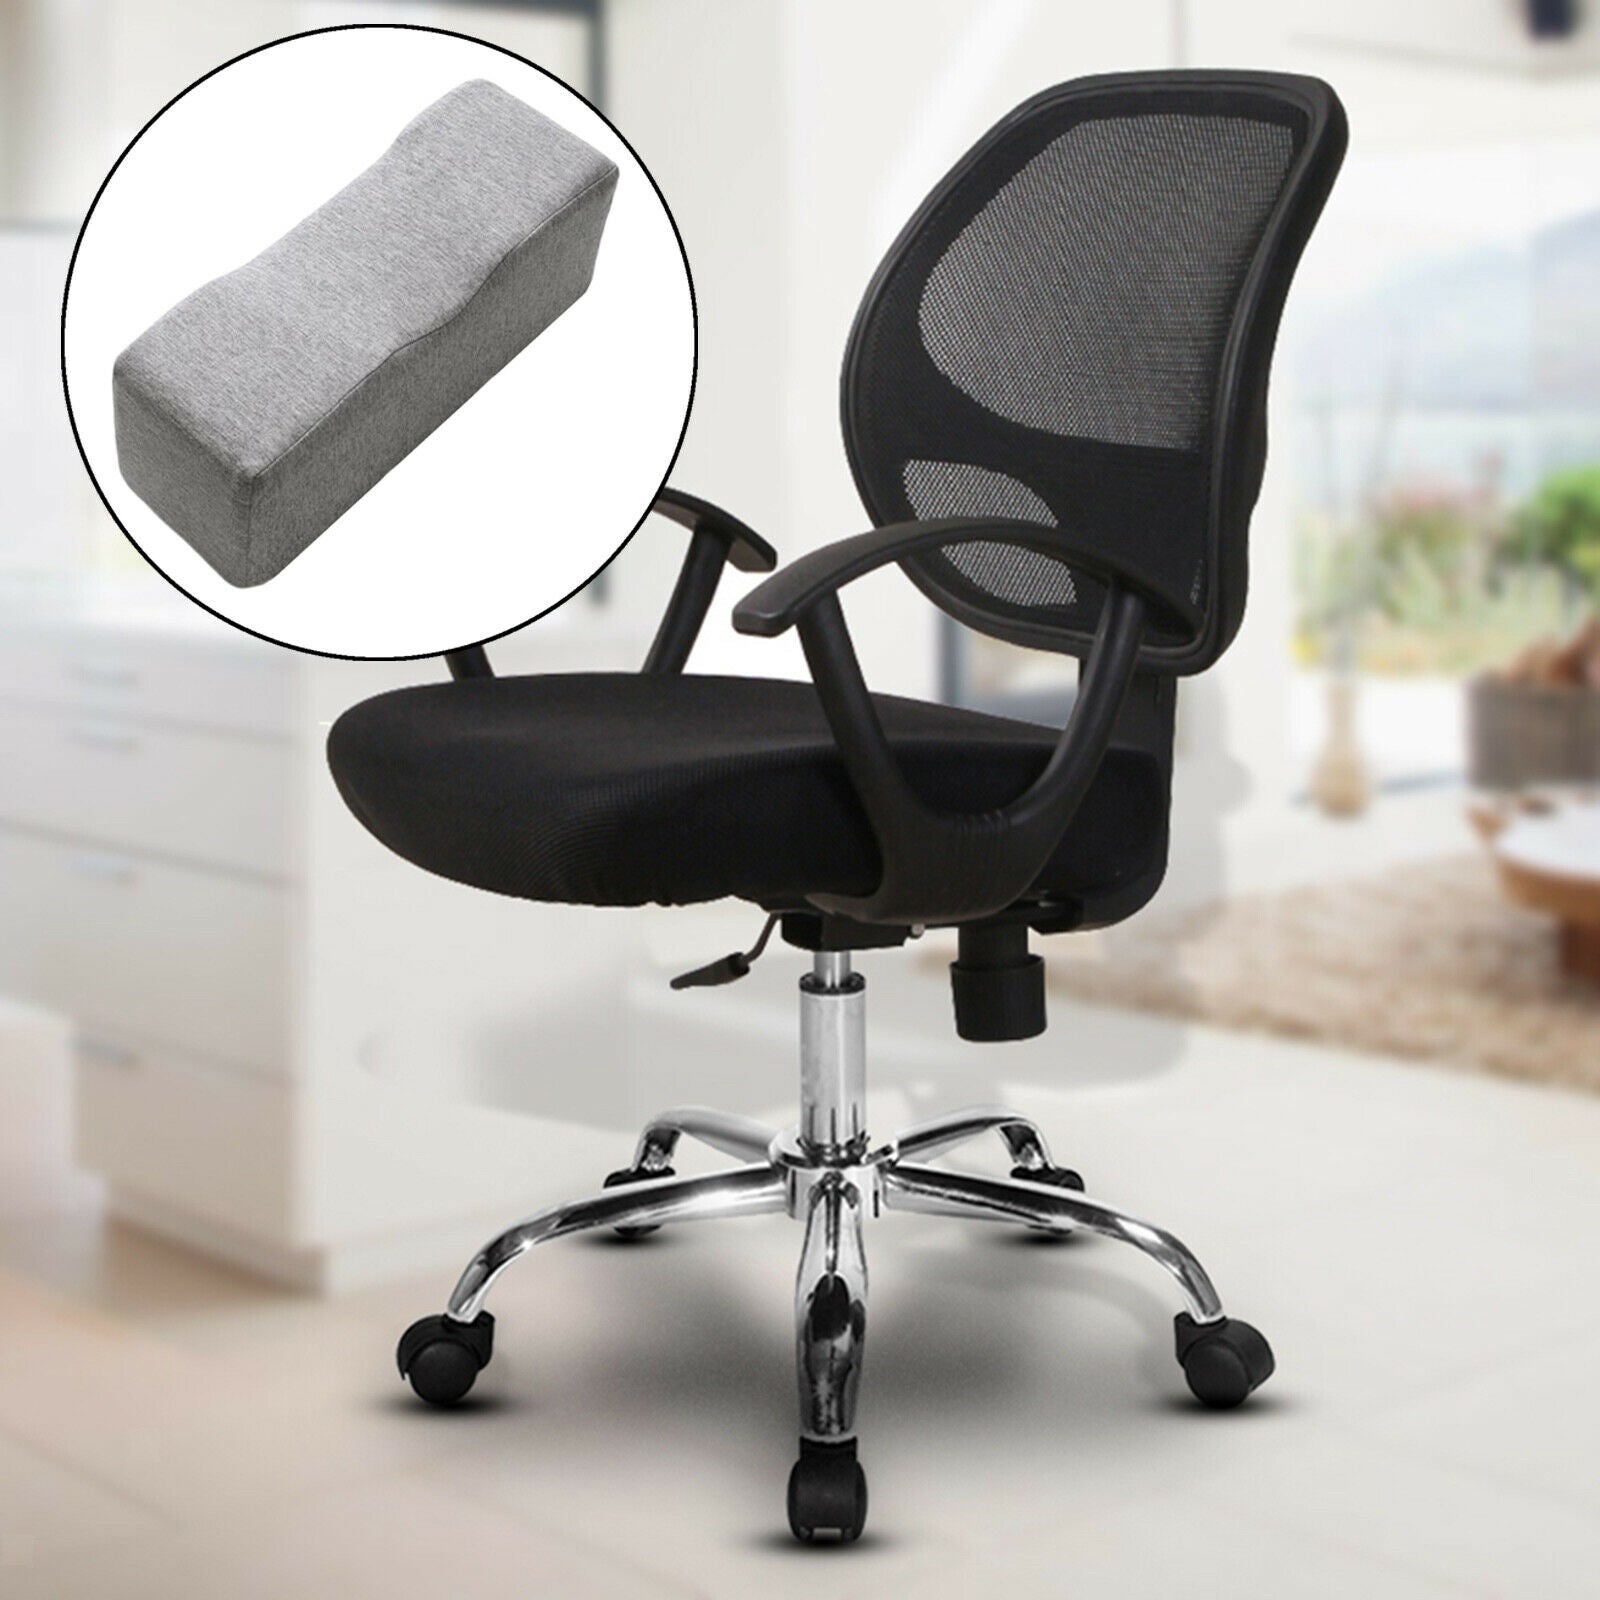 Chair Arm Rest Pad Comfortable Antifouling Office Chairs Wheelchair